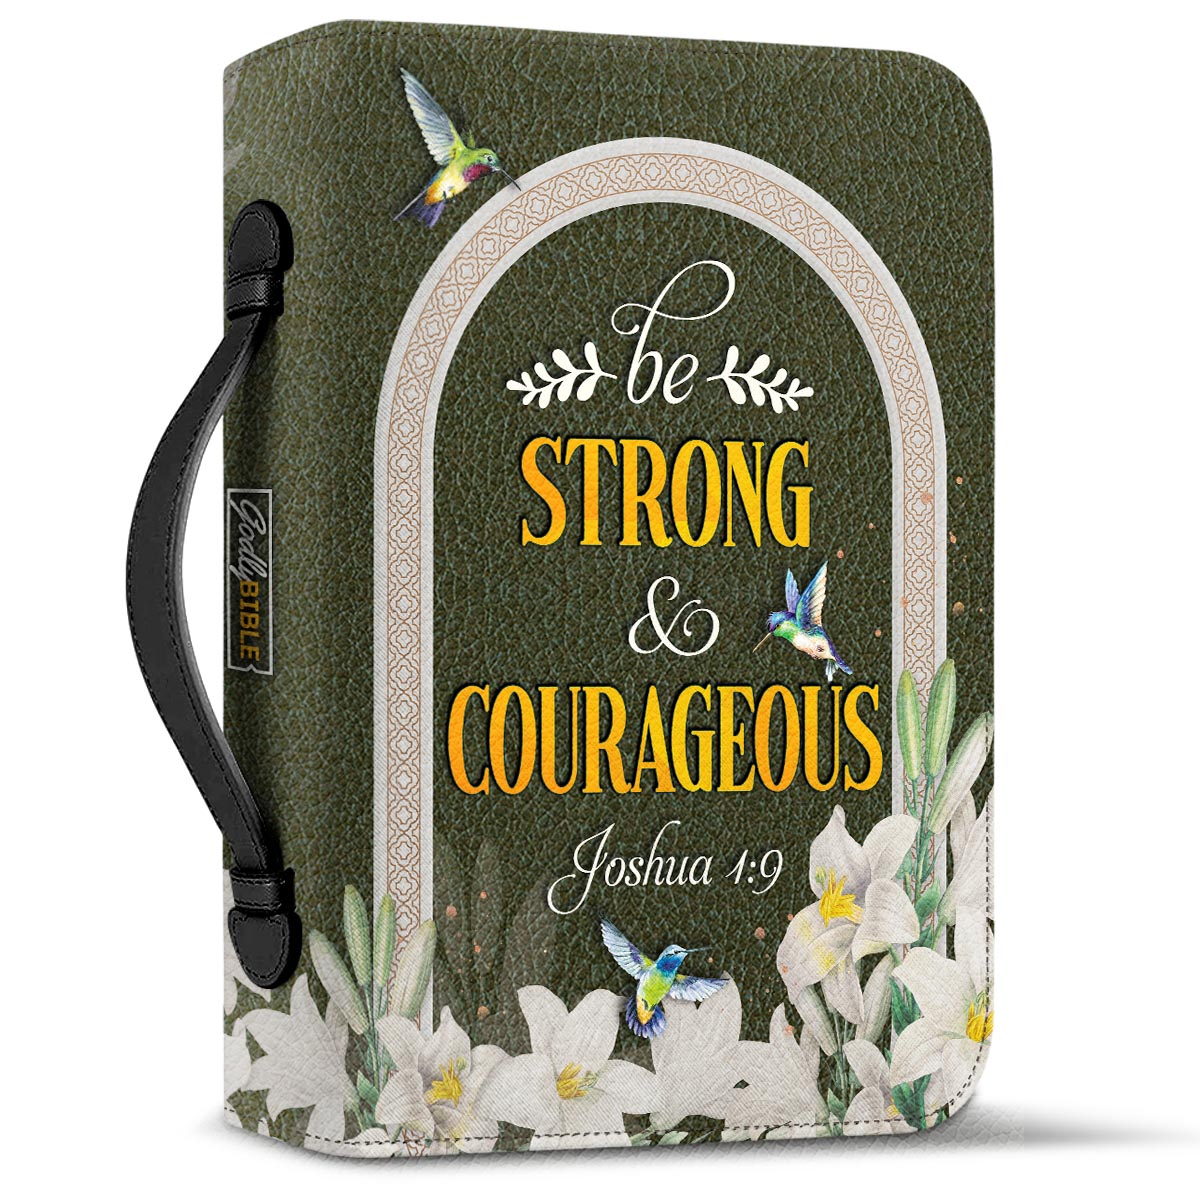  Personalized Bible Cover - Be Strong And Courageous Joshua 1 9 Hummingbird Lily Bible Cover for Christians